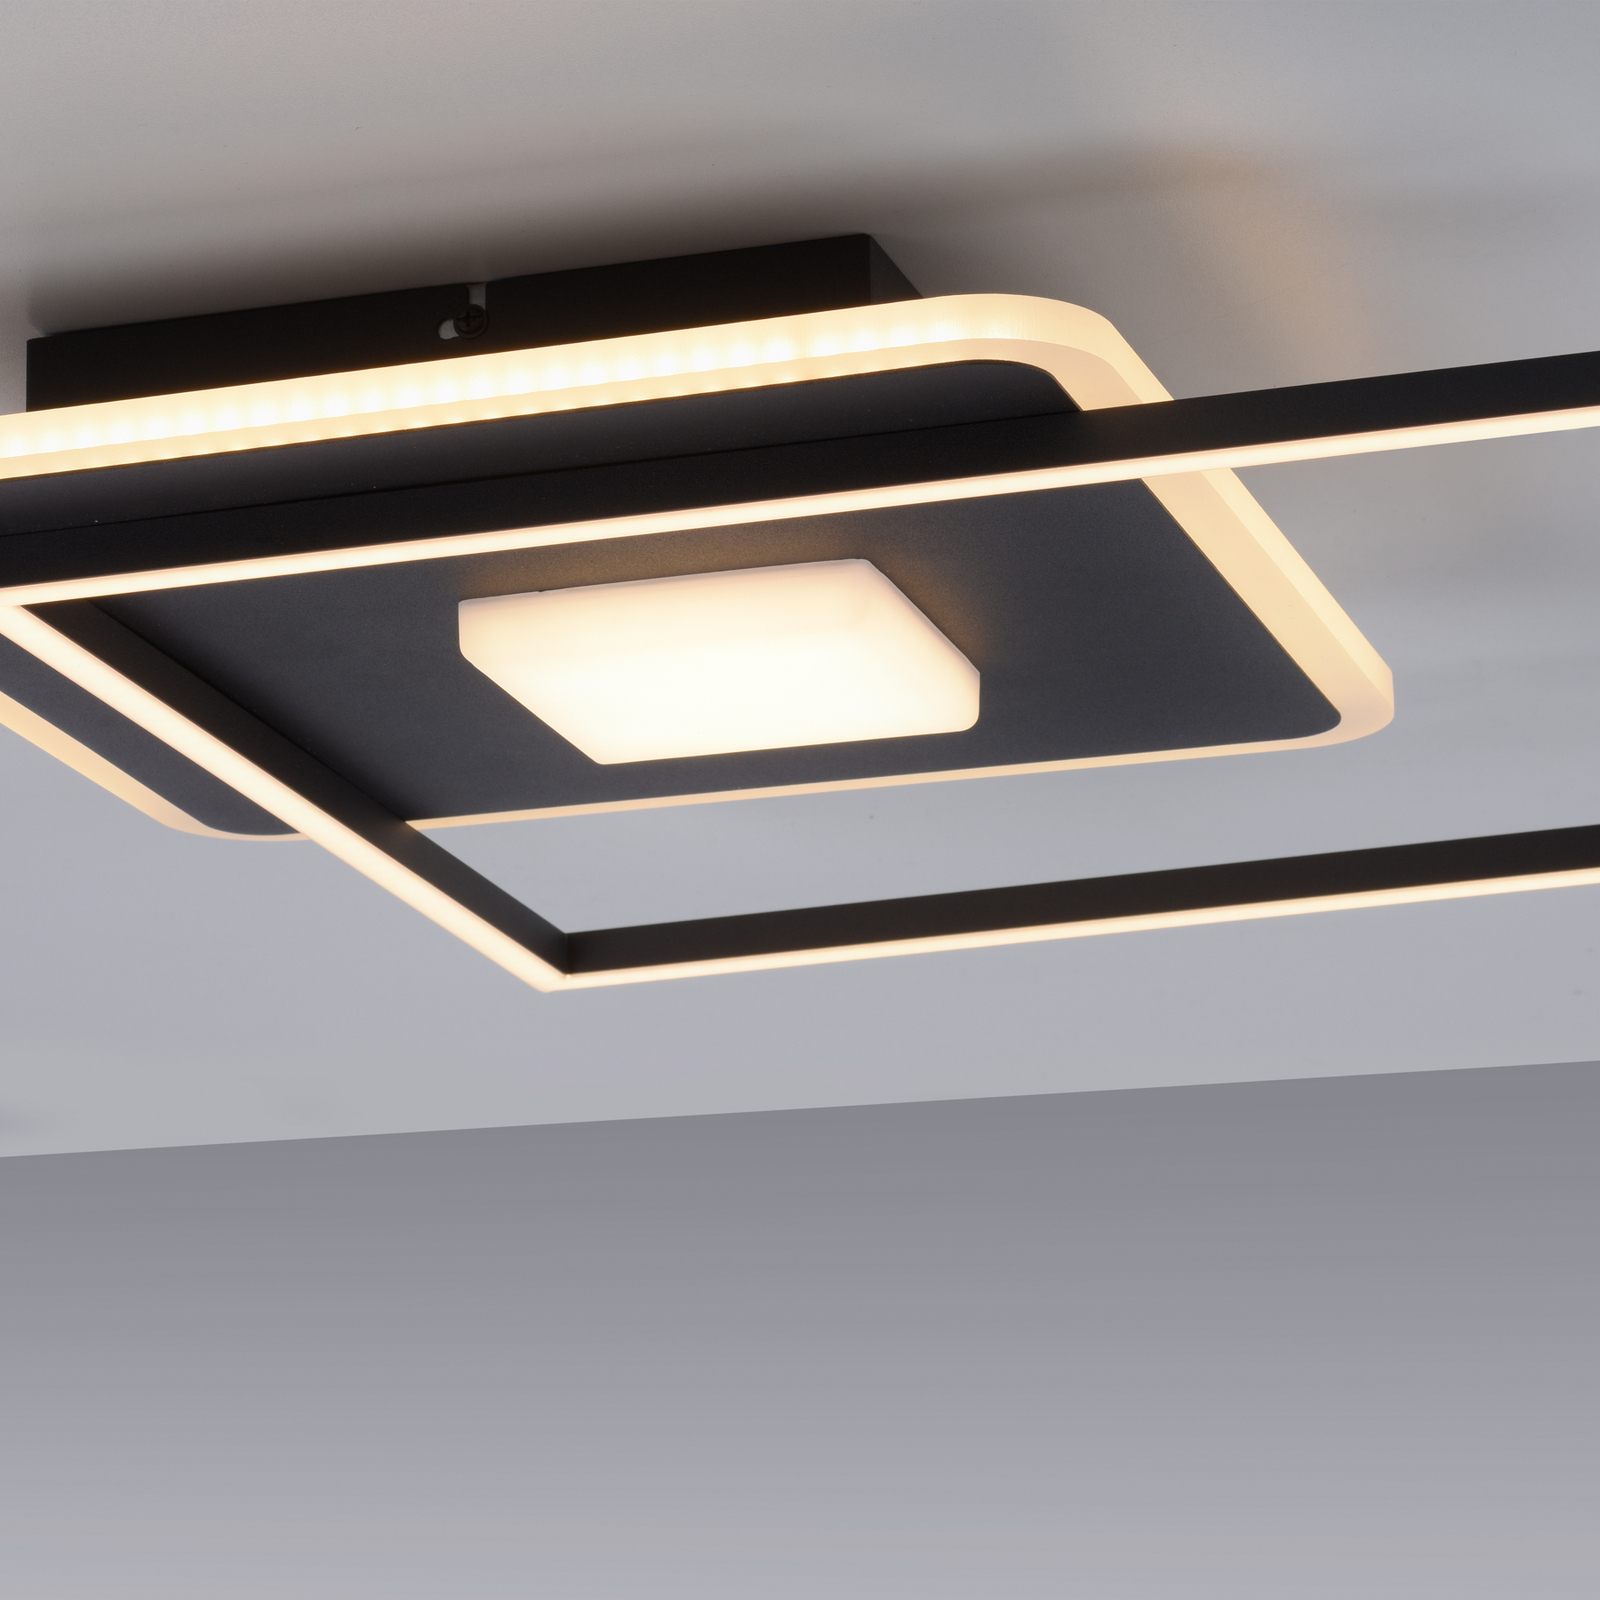 Domino LED ceiling light with Switchmo dimmer